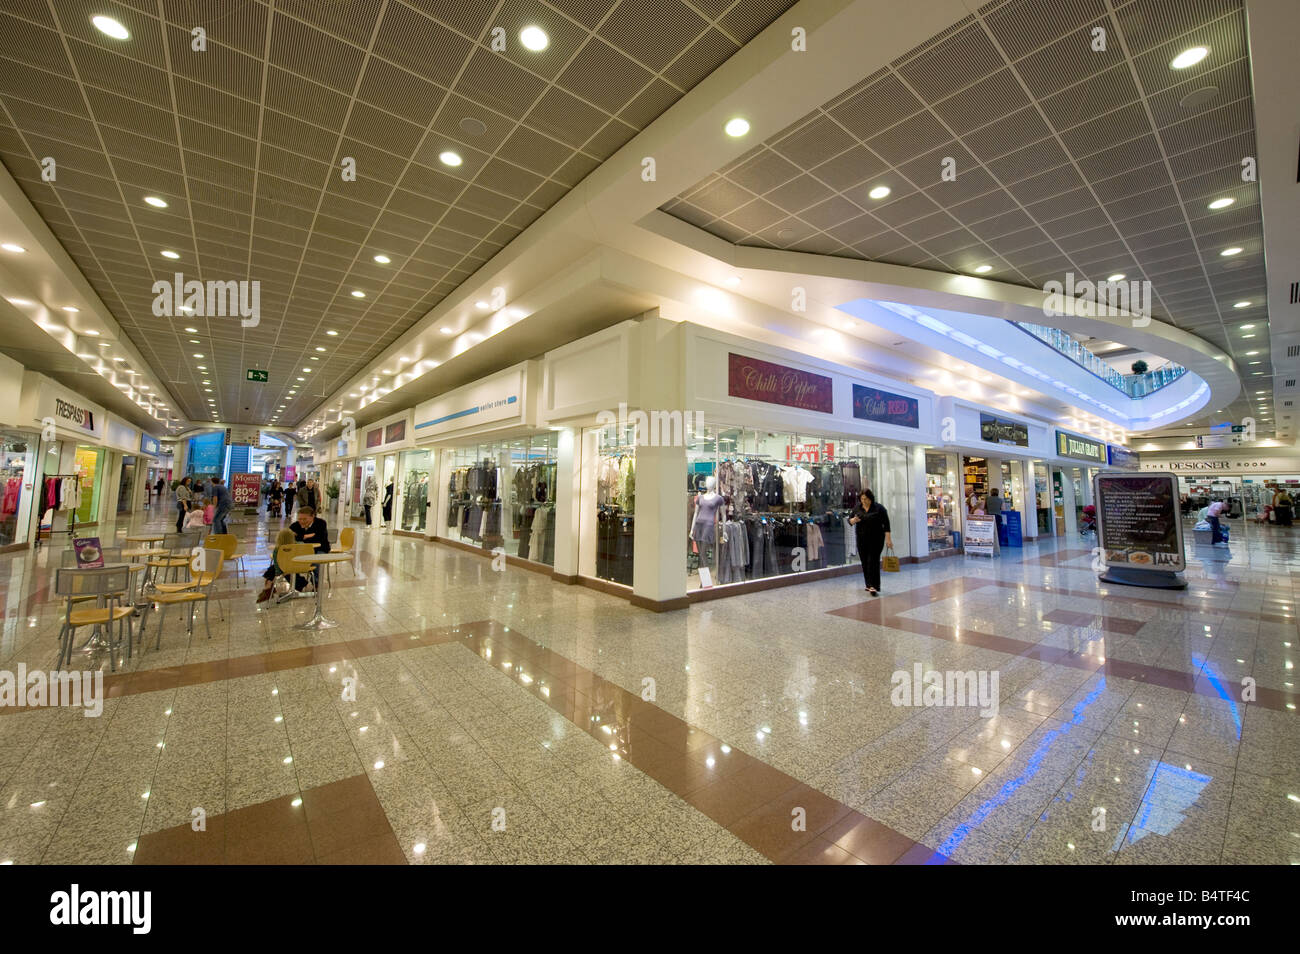 Lowry Outlet Shopping Mall at Salford Quays, Manchester, Great Britain Stock Photo